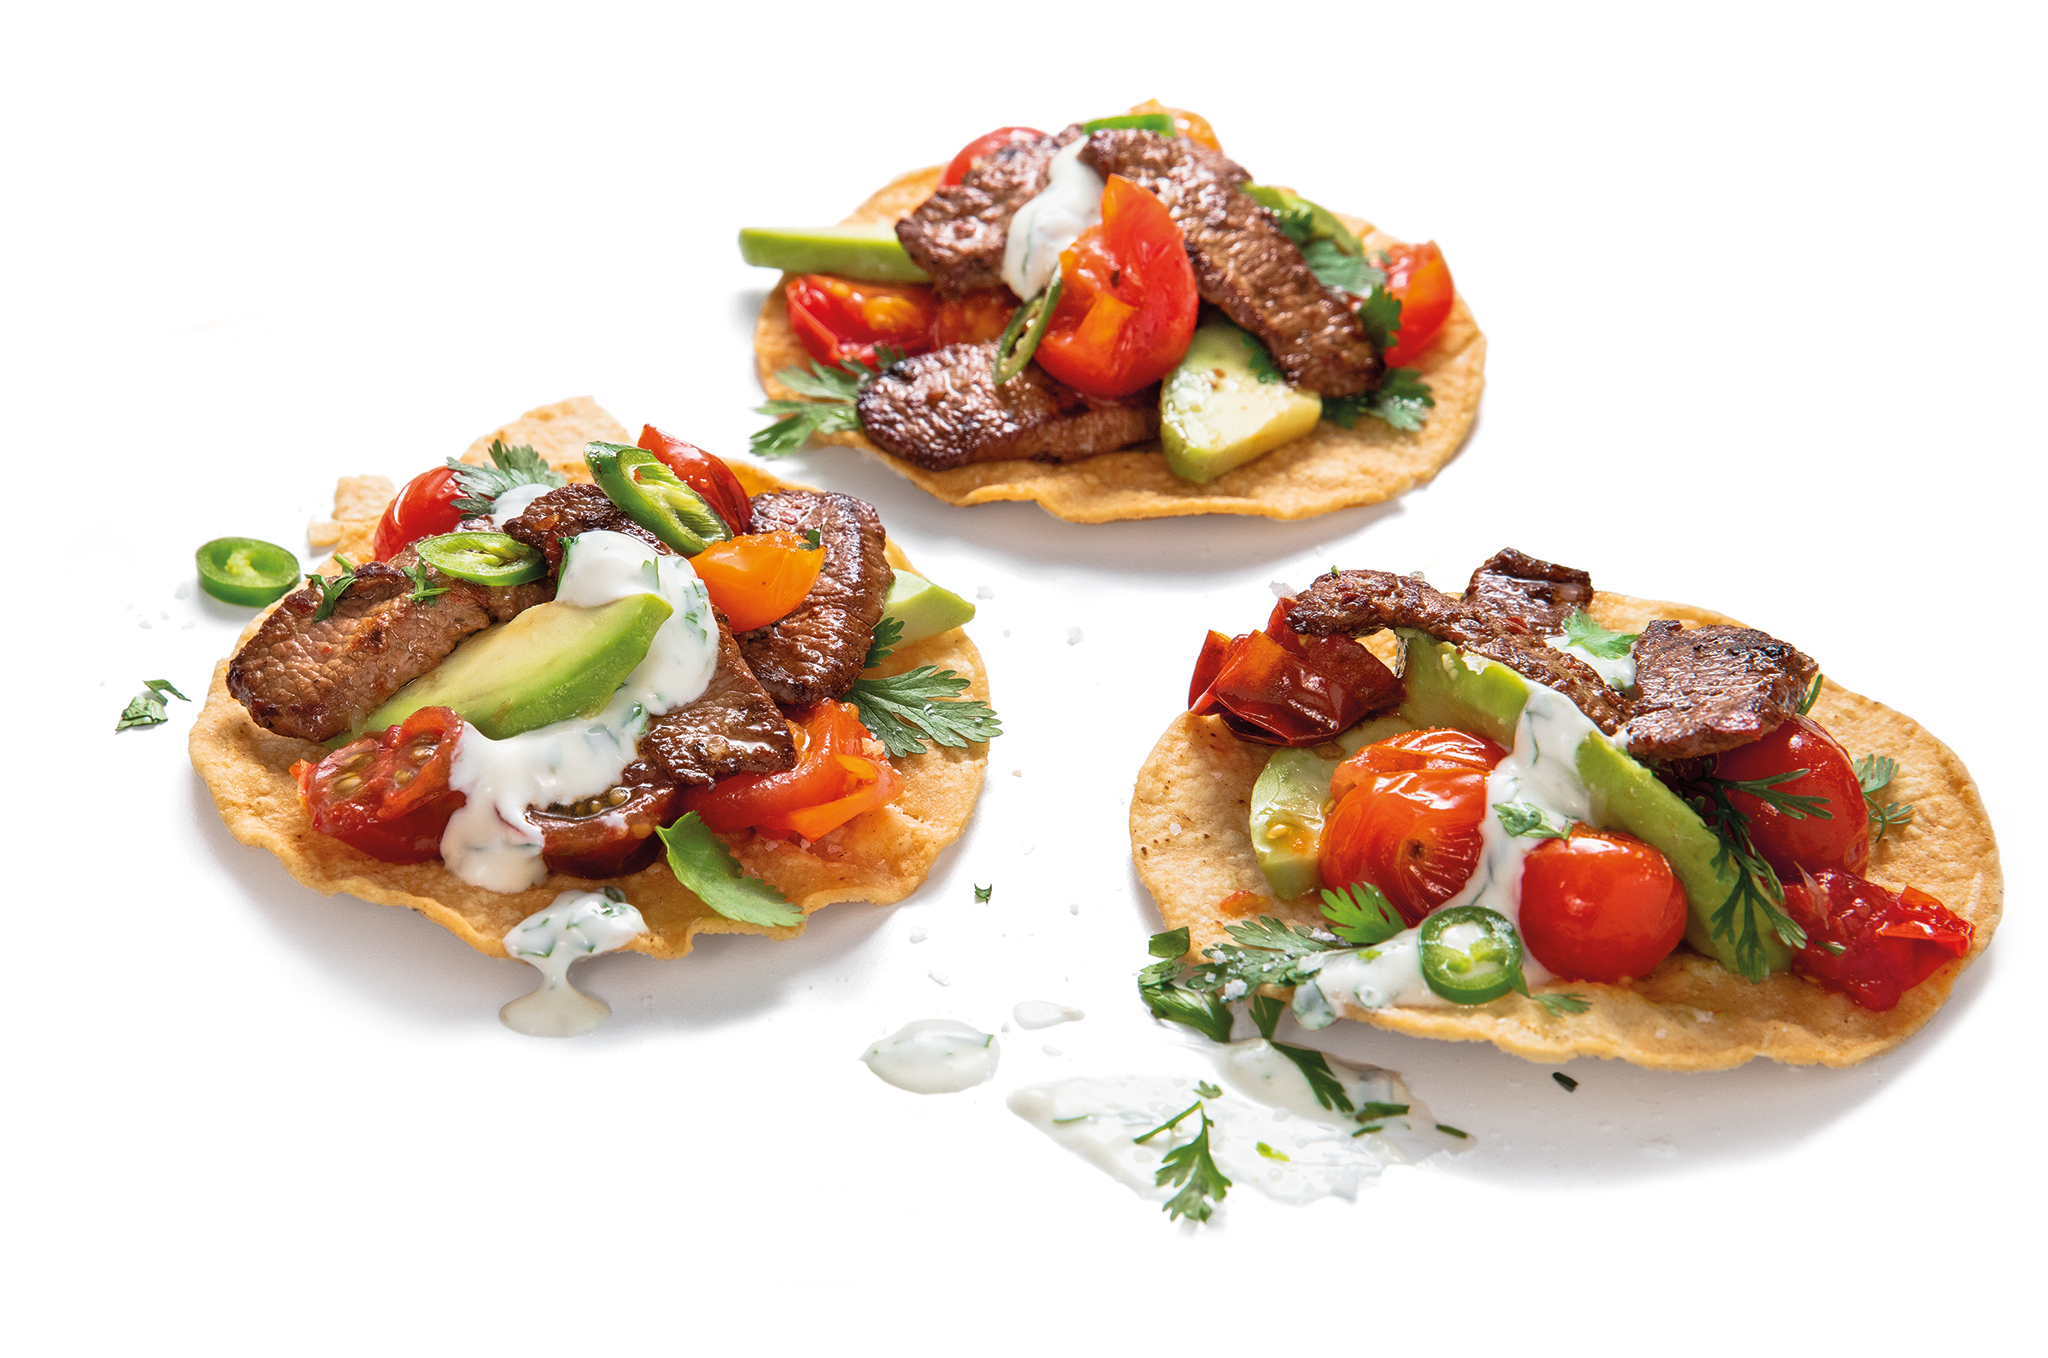 Lamb Stir-Fry Tostadas with Coriander and Lime Dressing on plain background